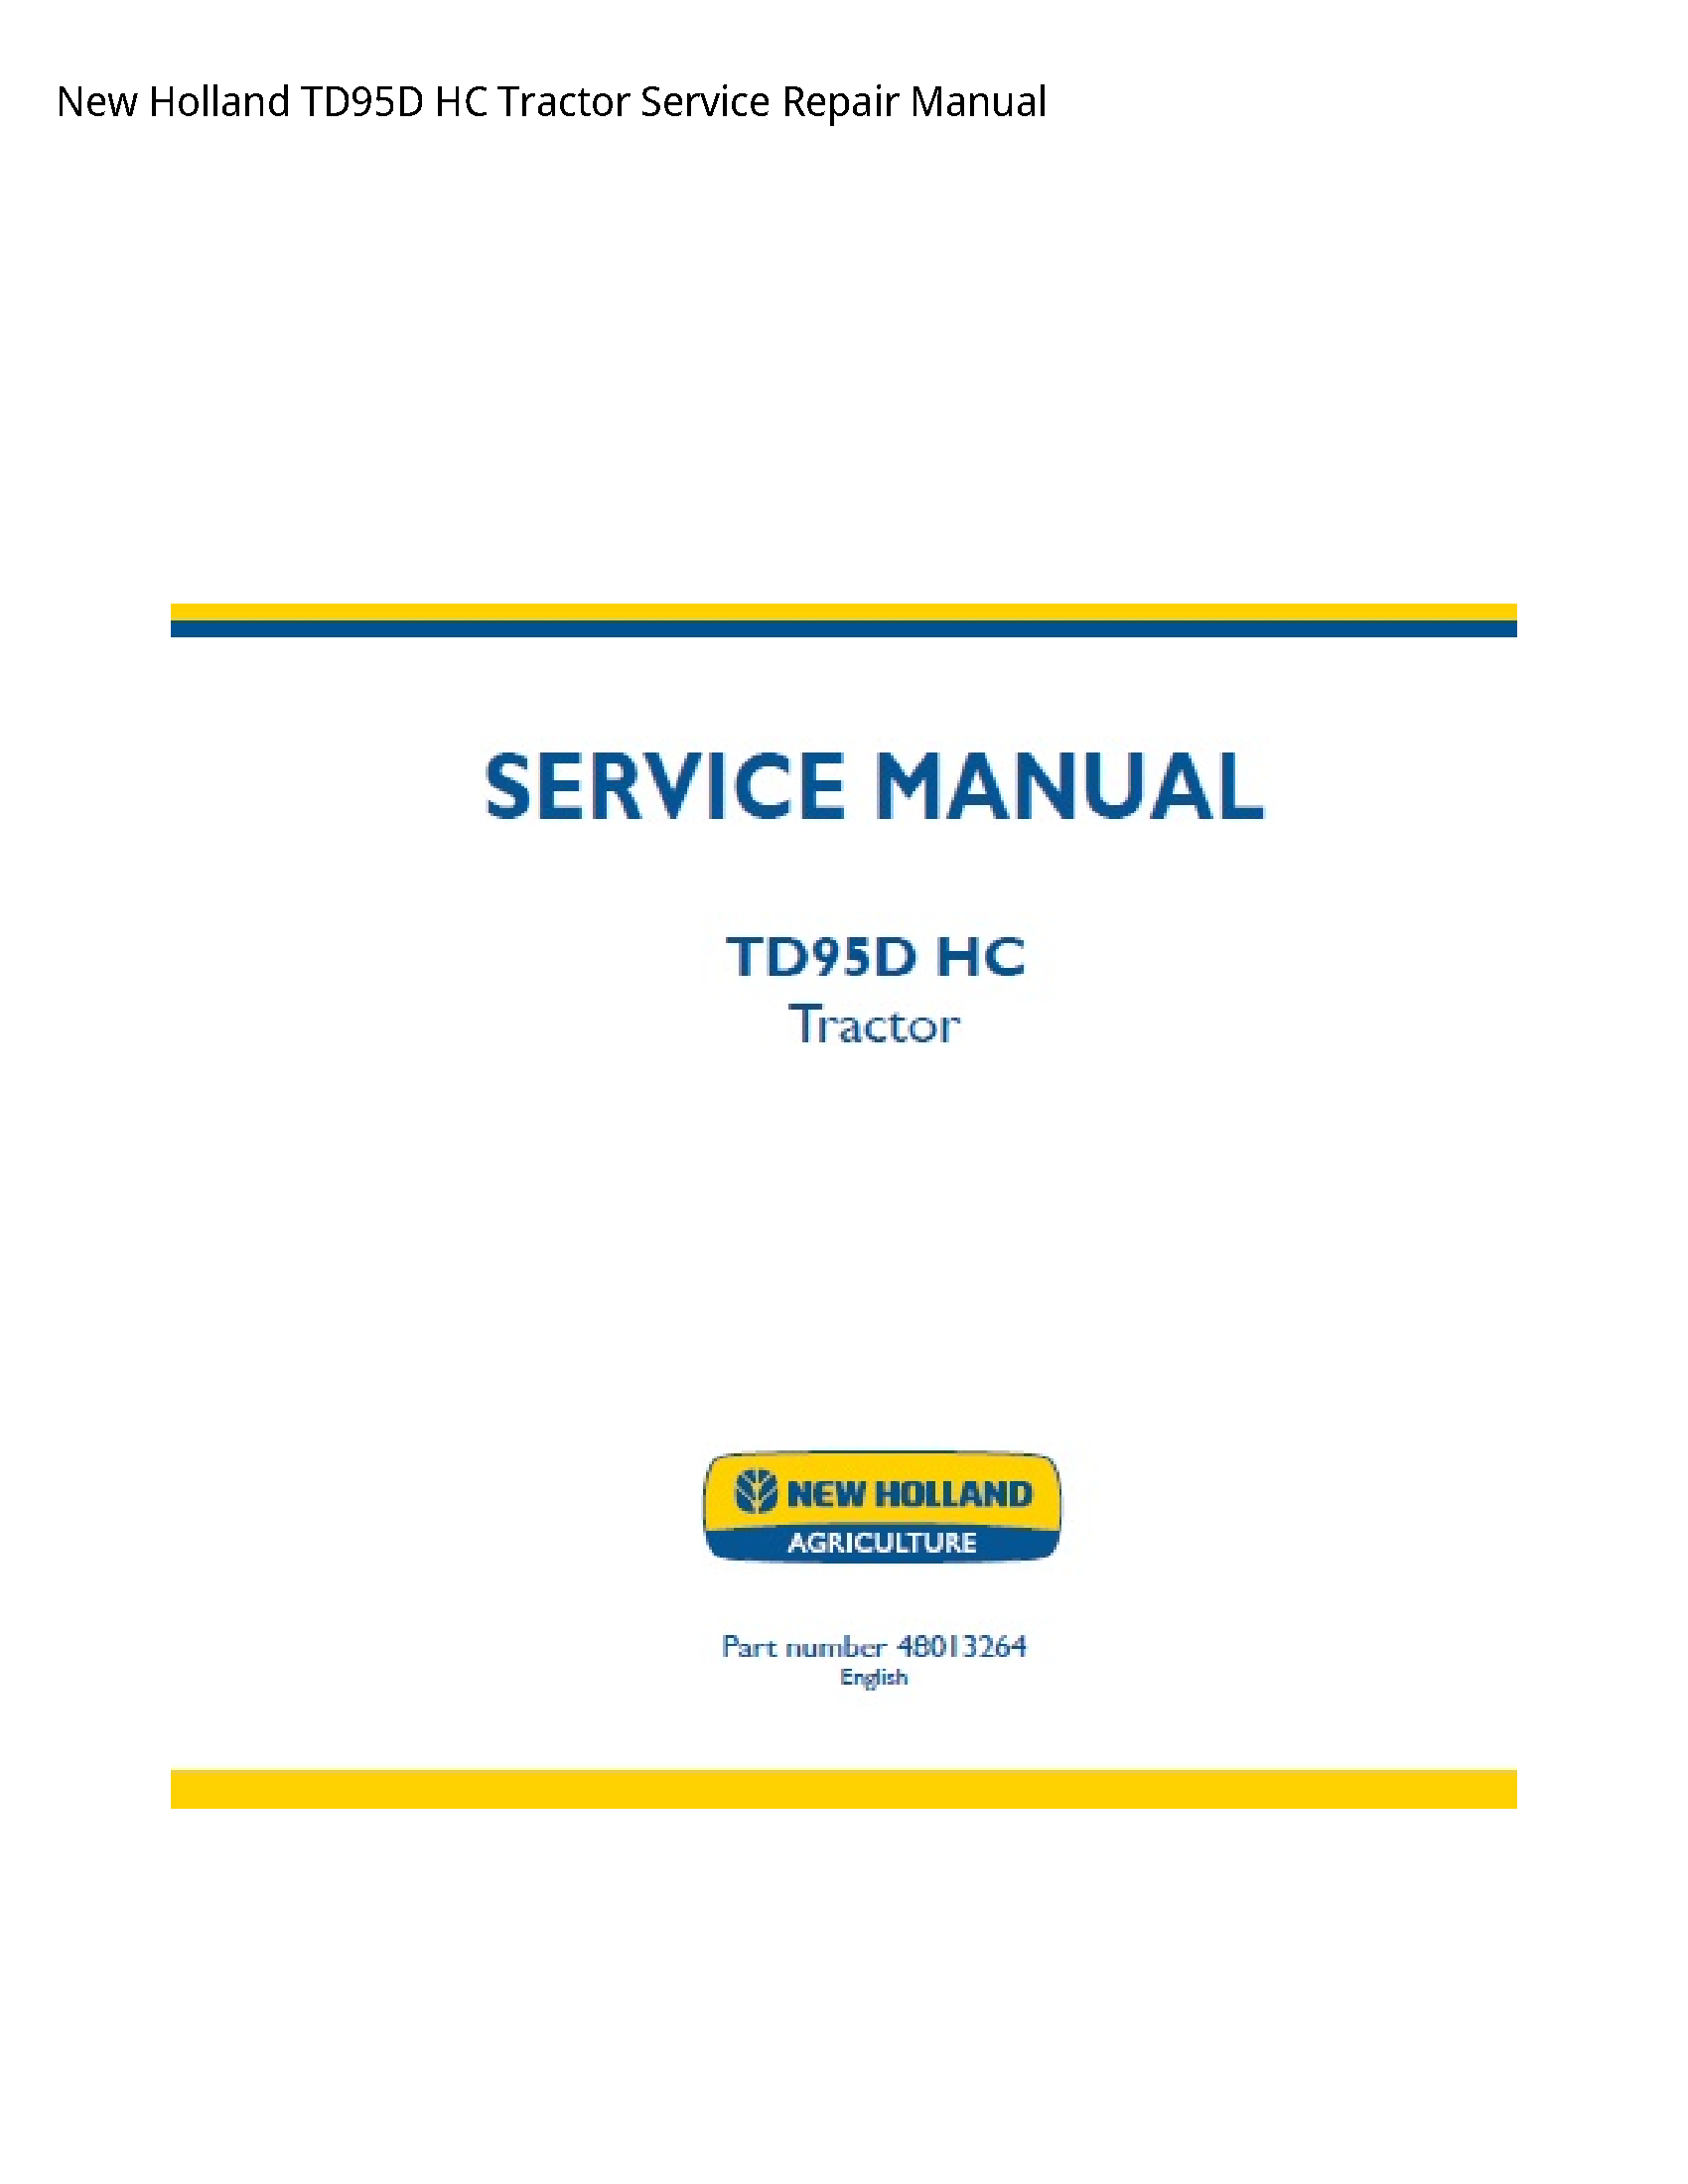 New Holland TD95D HC Tractor manual